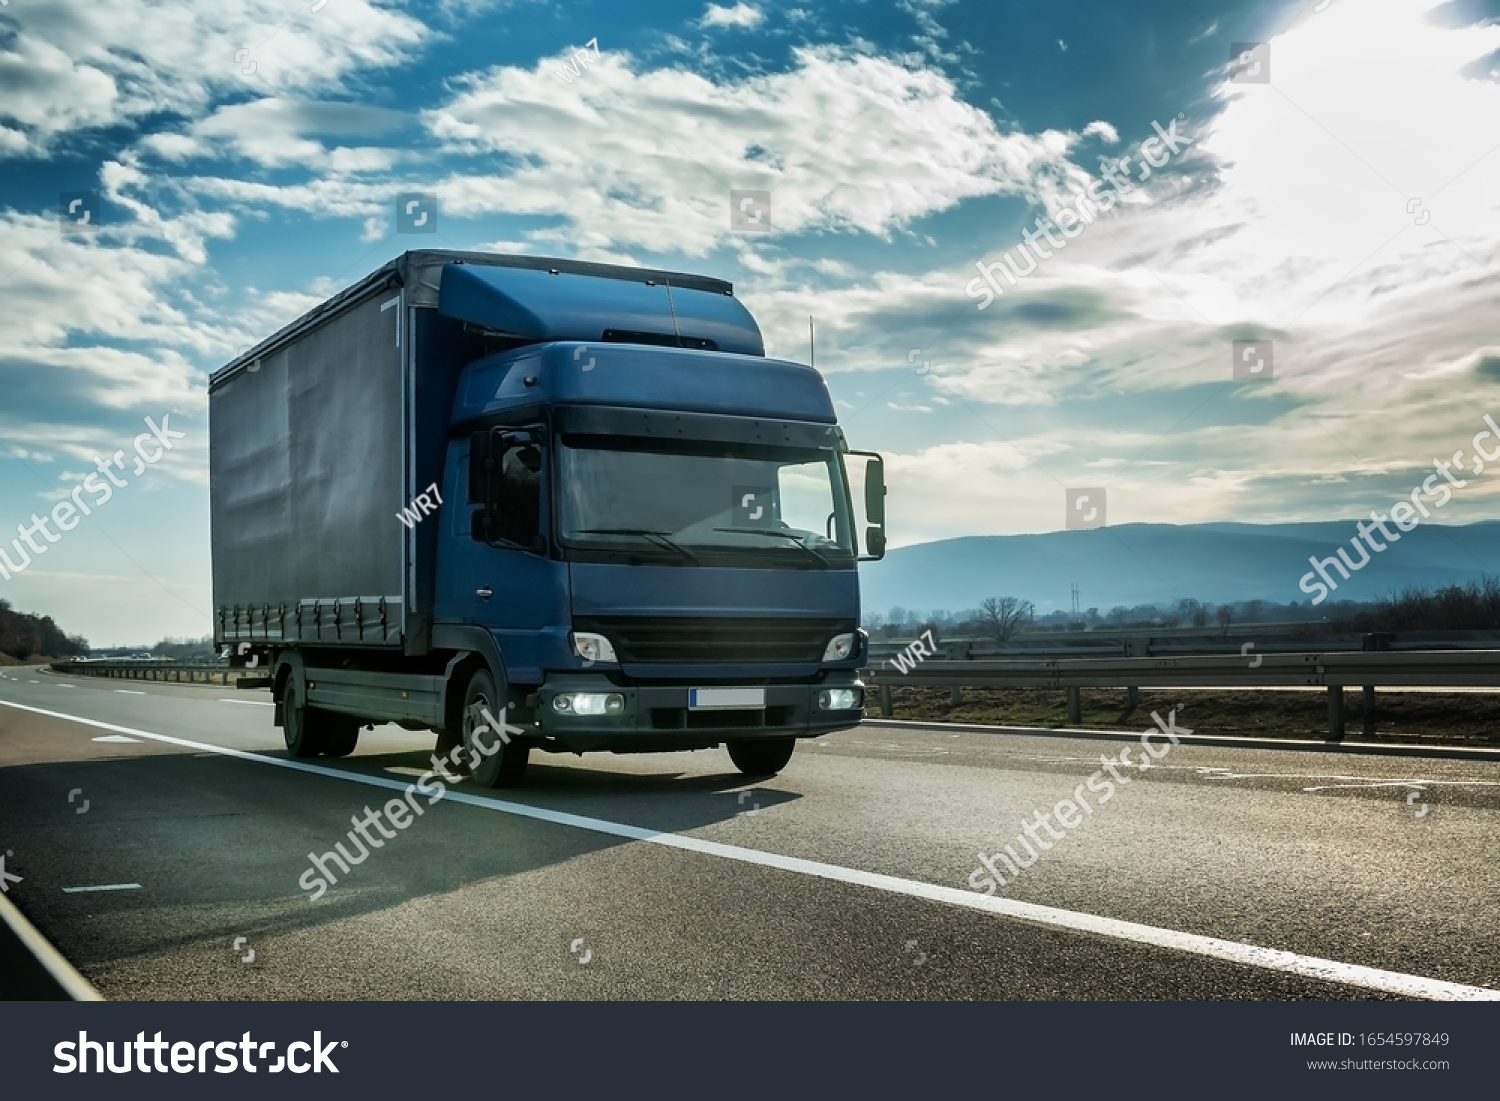 Blue semi trailer truck on a highway driving at bright sunny sunset. Transportation vehicle #1654597849